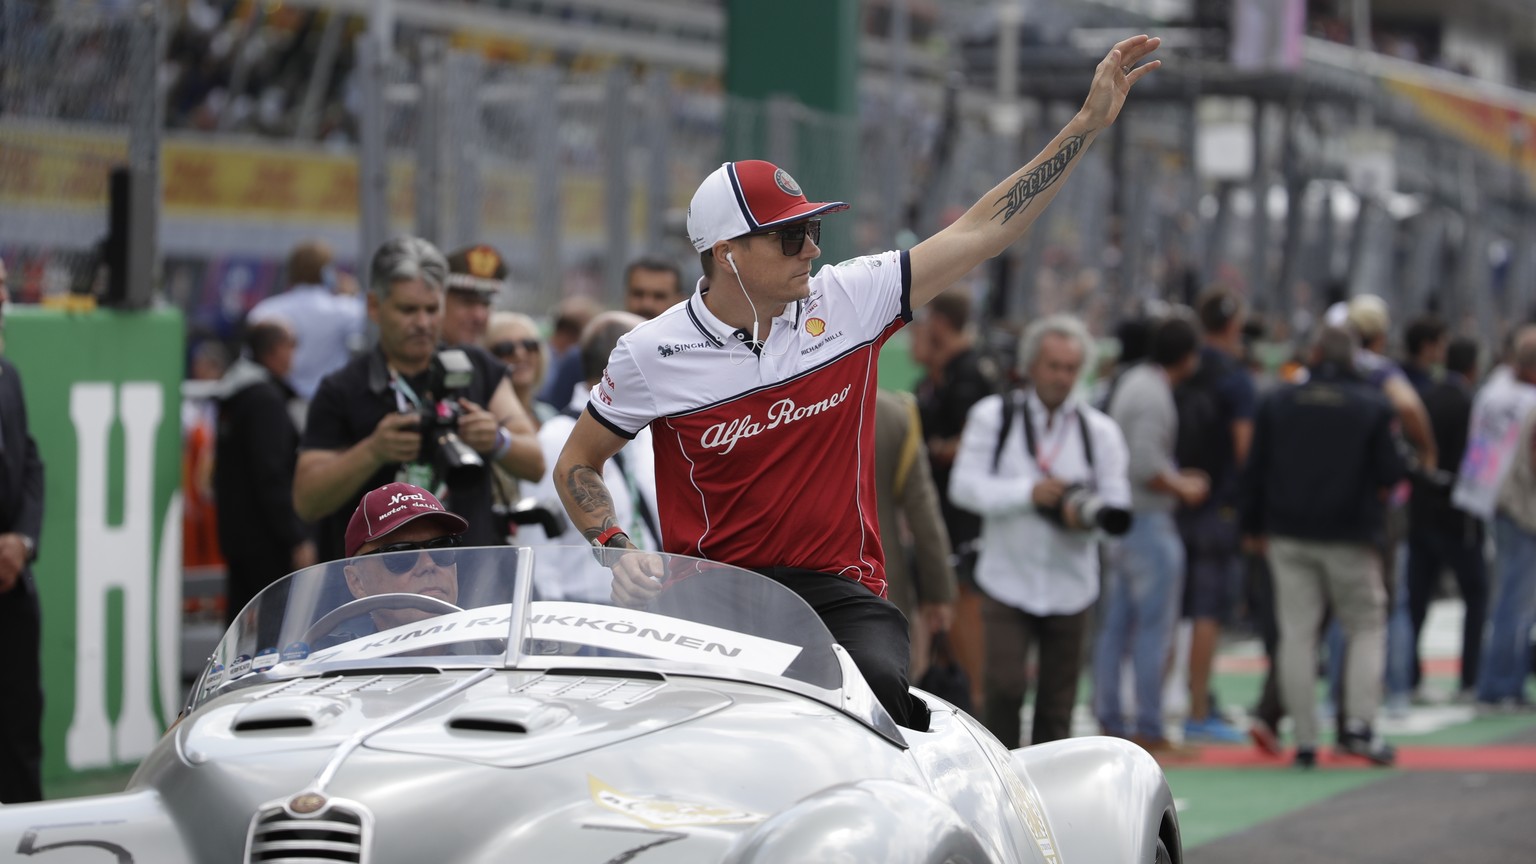 Alfa Romeo driver Kimi Raikkonen of Finland waves as sits at an old Alfa Romeo car during the drivers parade prior to the Formula One Italy Grand Prix at the Monza racetrack, in Monza, Italy, Sunday,  ...